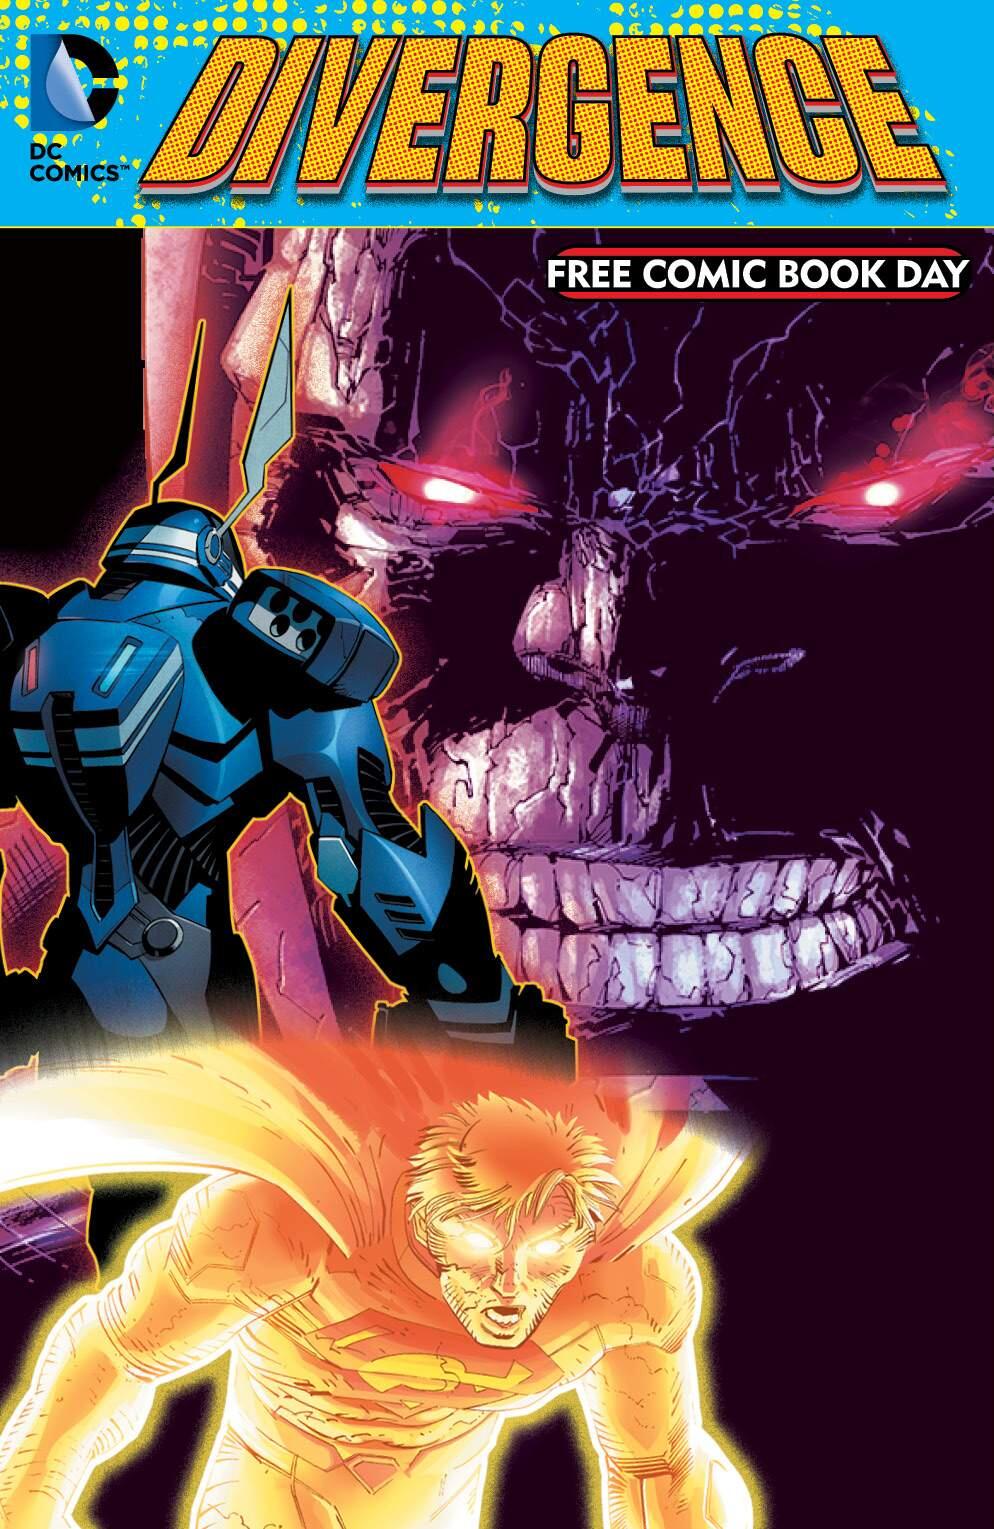 This photo provided by DC Entertainment shows the cover of 'DC Comics: Divergence.' The creators of Batman are dethroning Bruce Wayne and bringing in a new Dark Knight as DC Comics begins to gear up for the annual Free Comic Book Day on Saturday, May 2, 2015, giveaways and a big superhero summer in books and on screen. (DC Entertainment via AP)